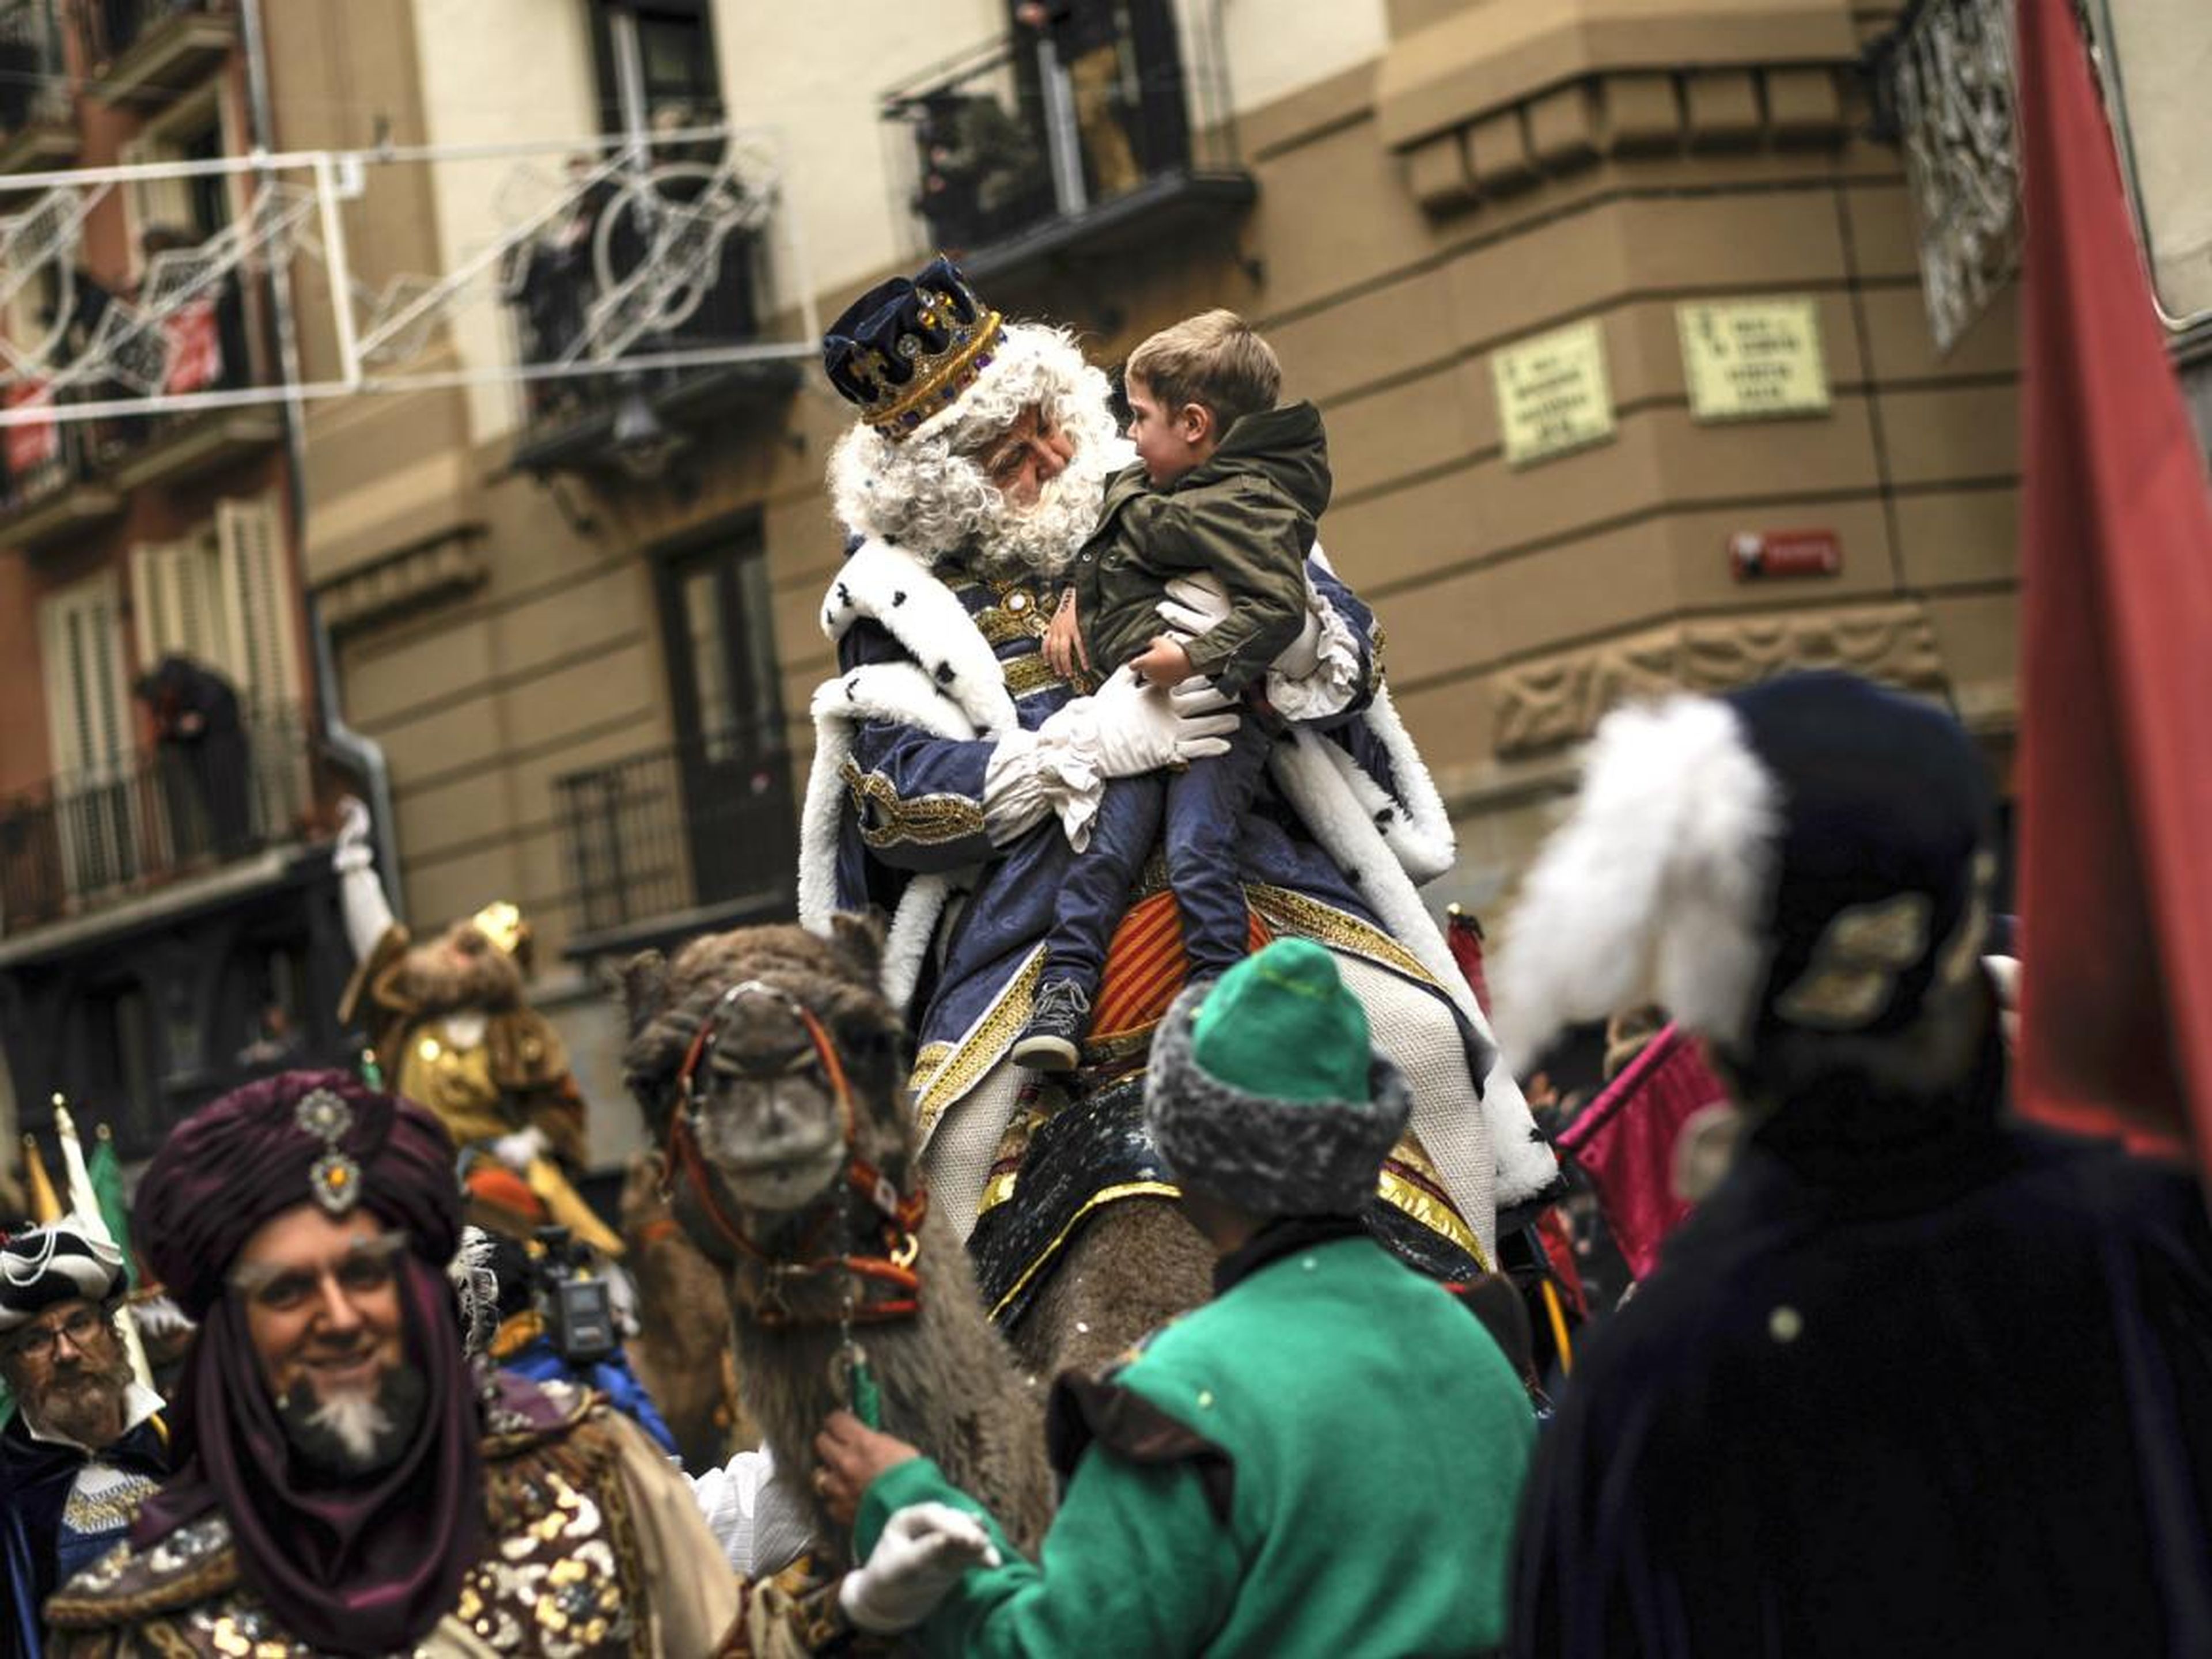 One of the Reyes Magos holds a young boy on his lap during a celebration in Pamplona, Spain.